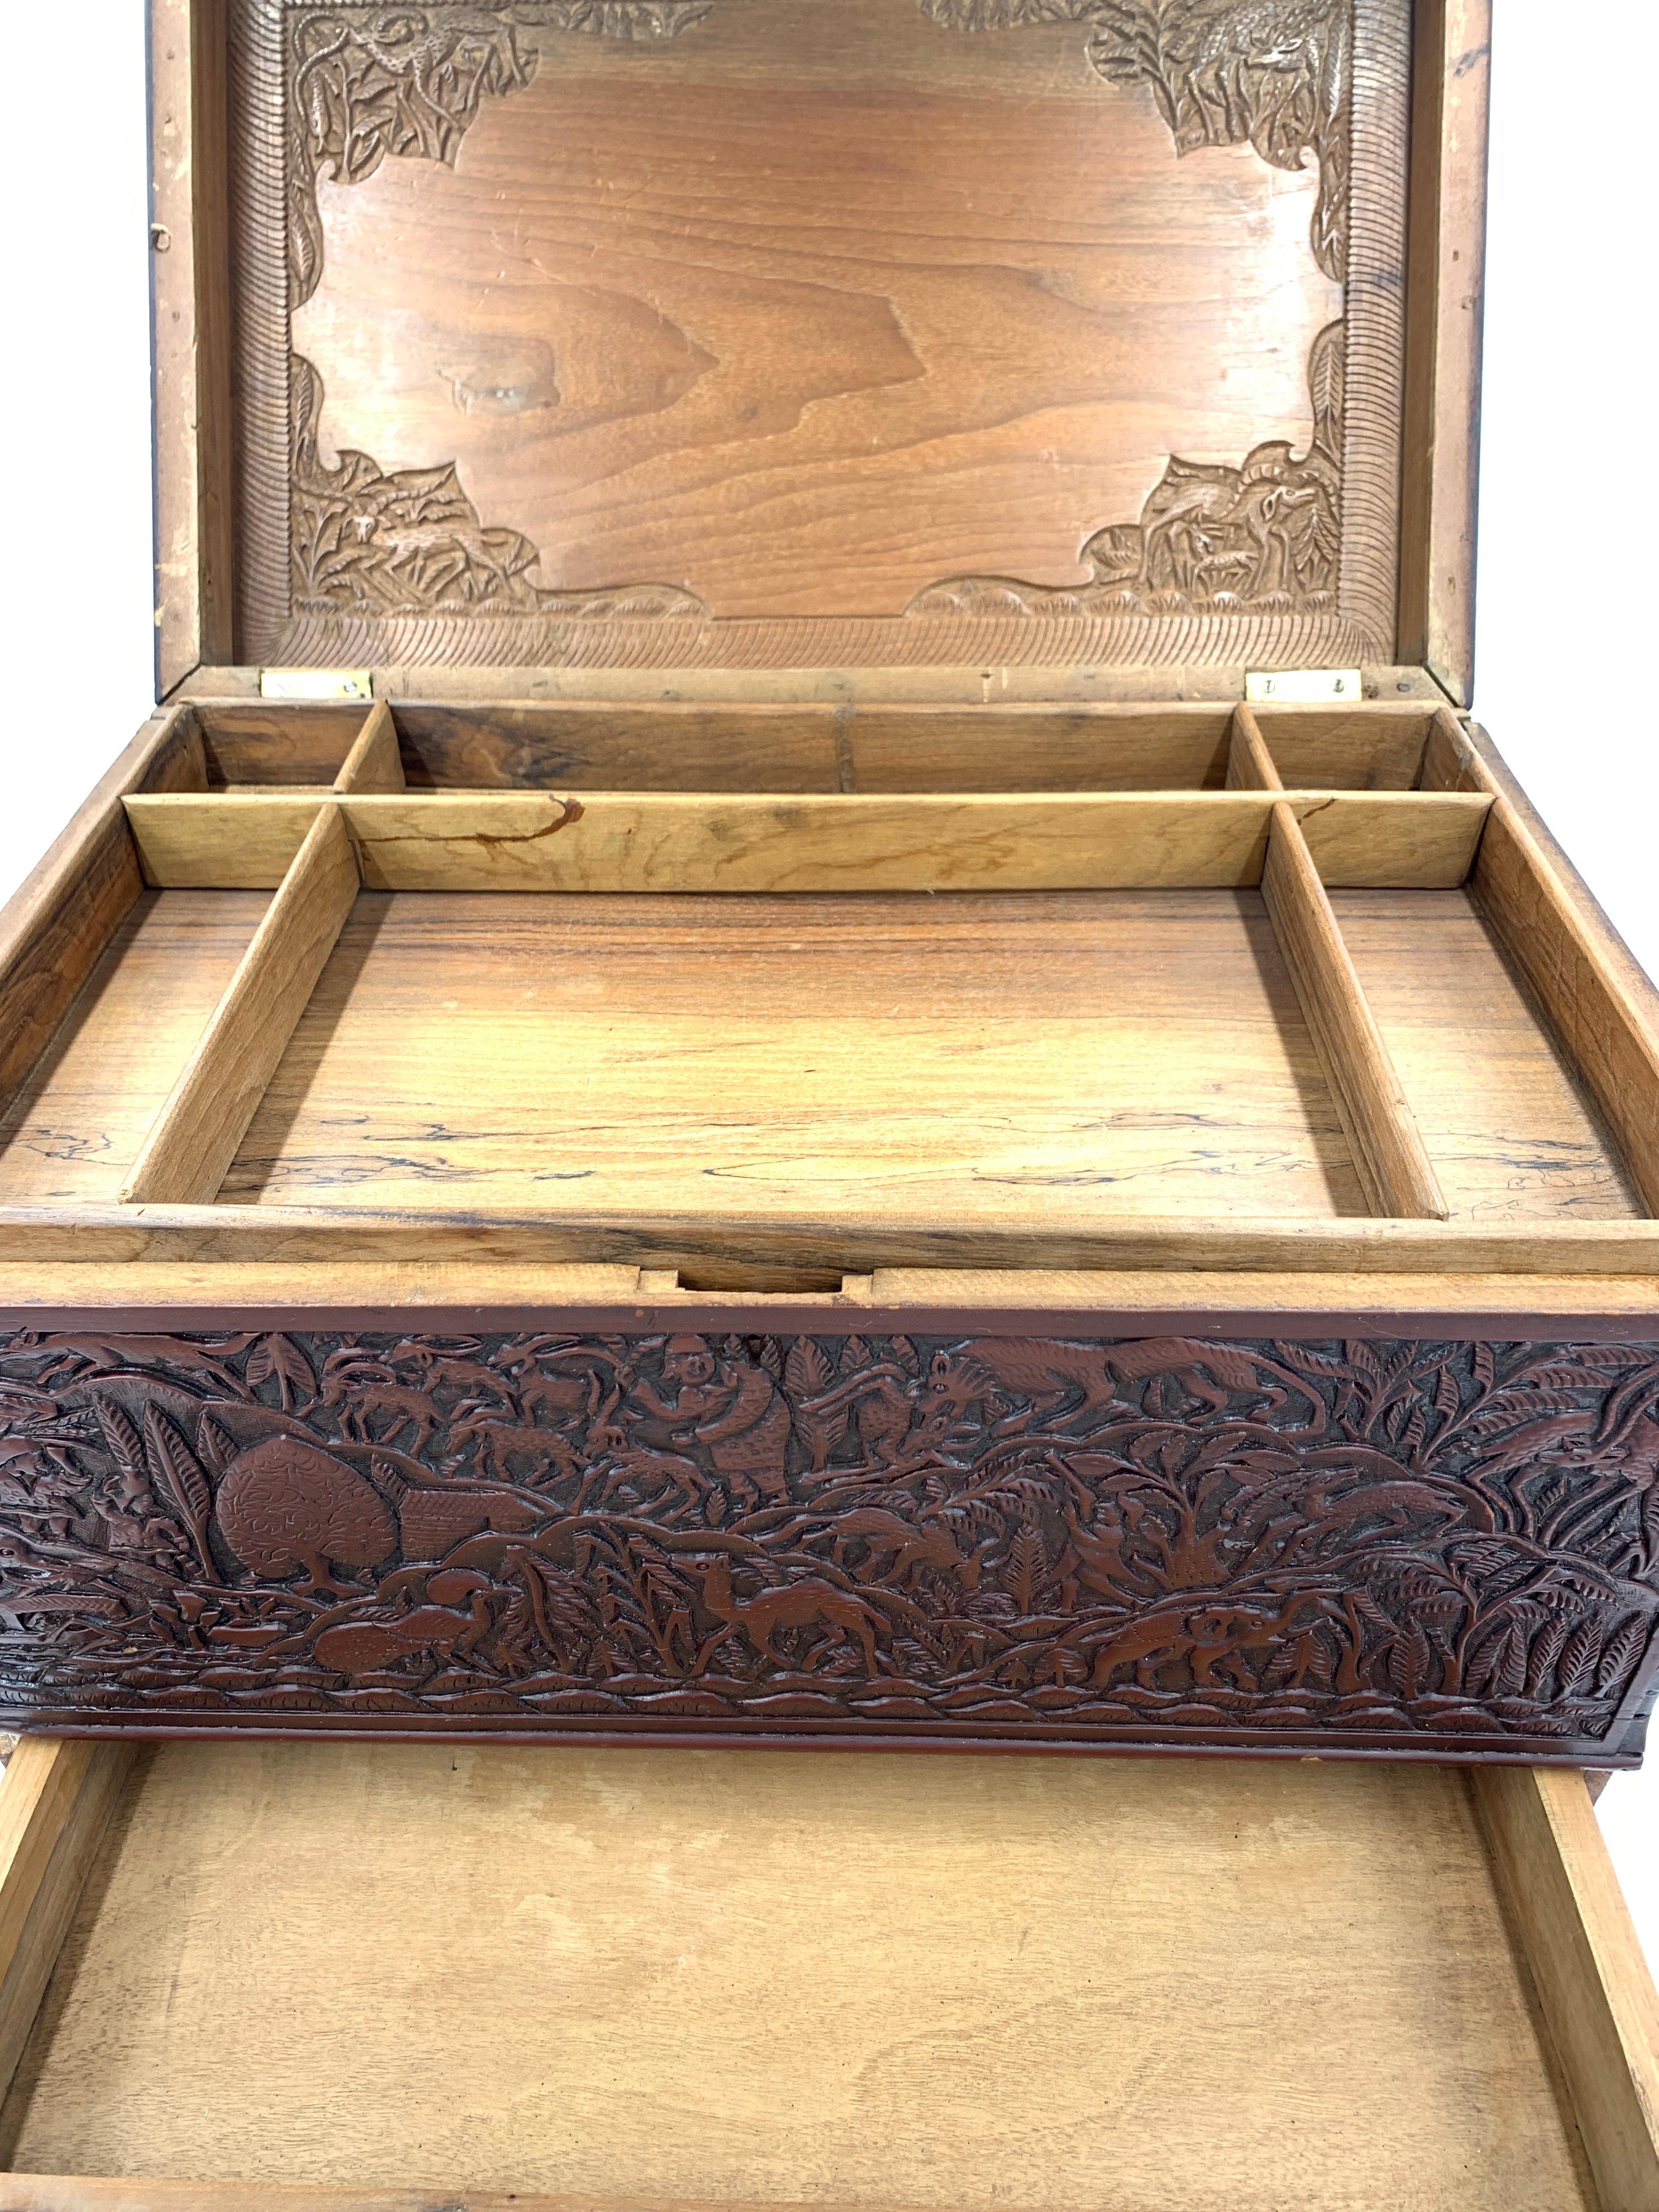 Large 19th Century Sandalwood Jewellery Box, South India For Sale 1